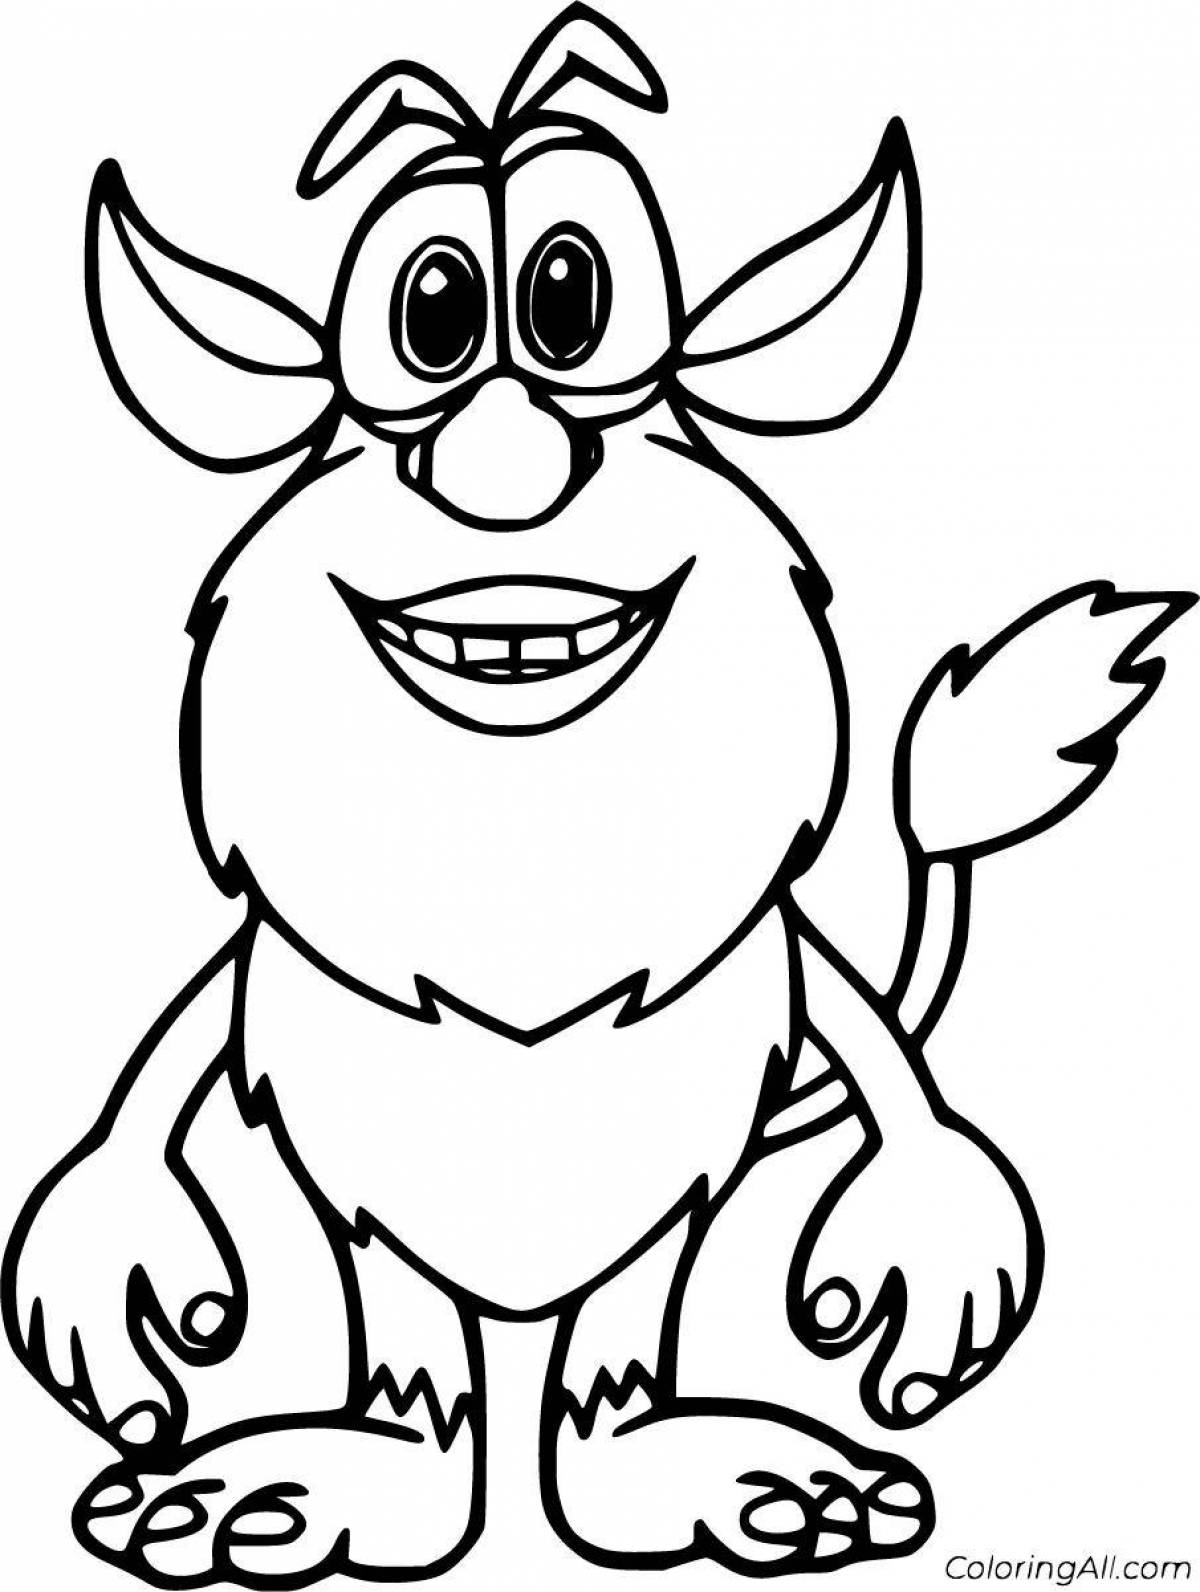 Fun coloring book with cartoon characters for 4-5 year olds